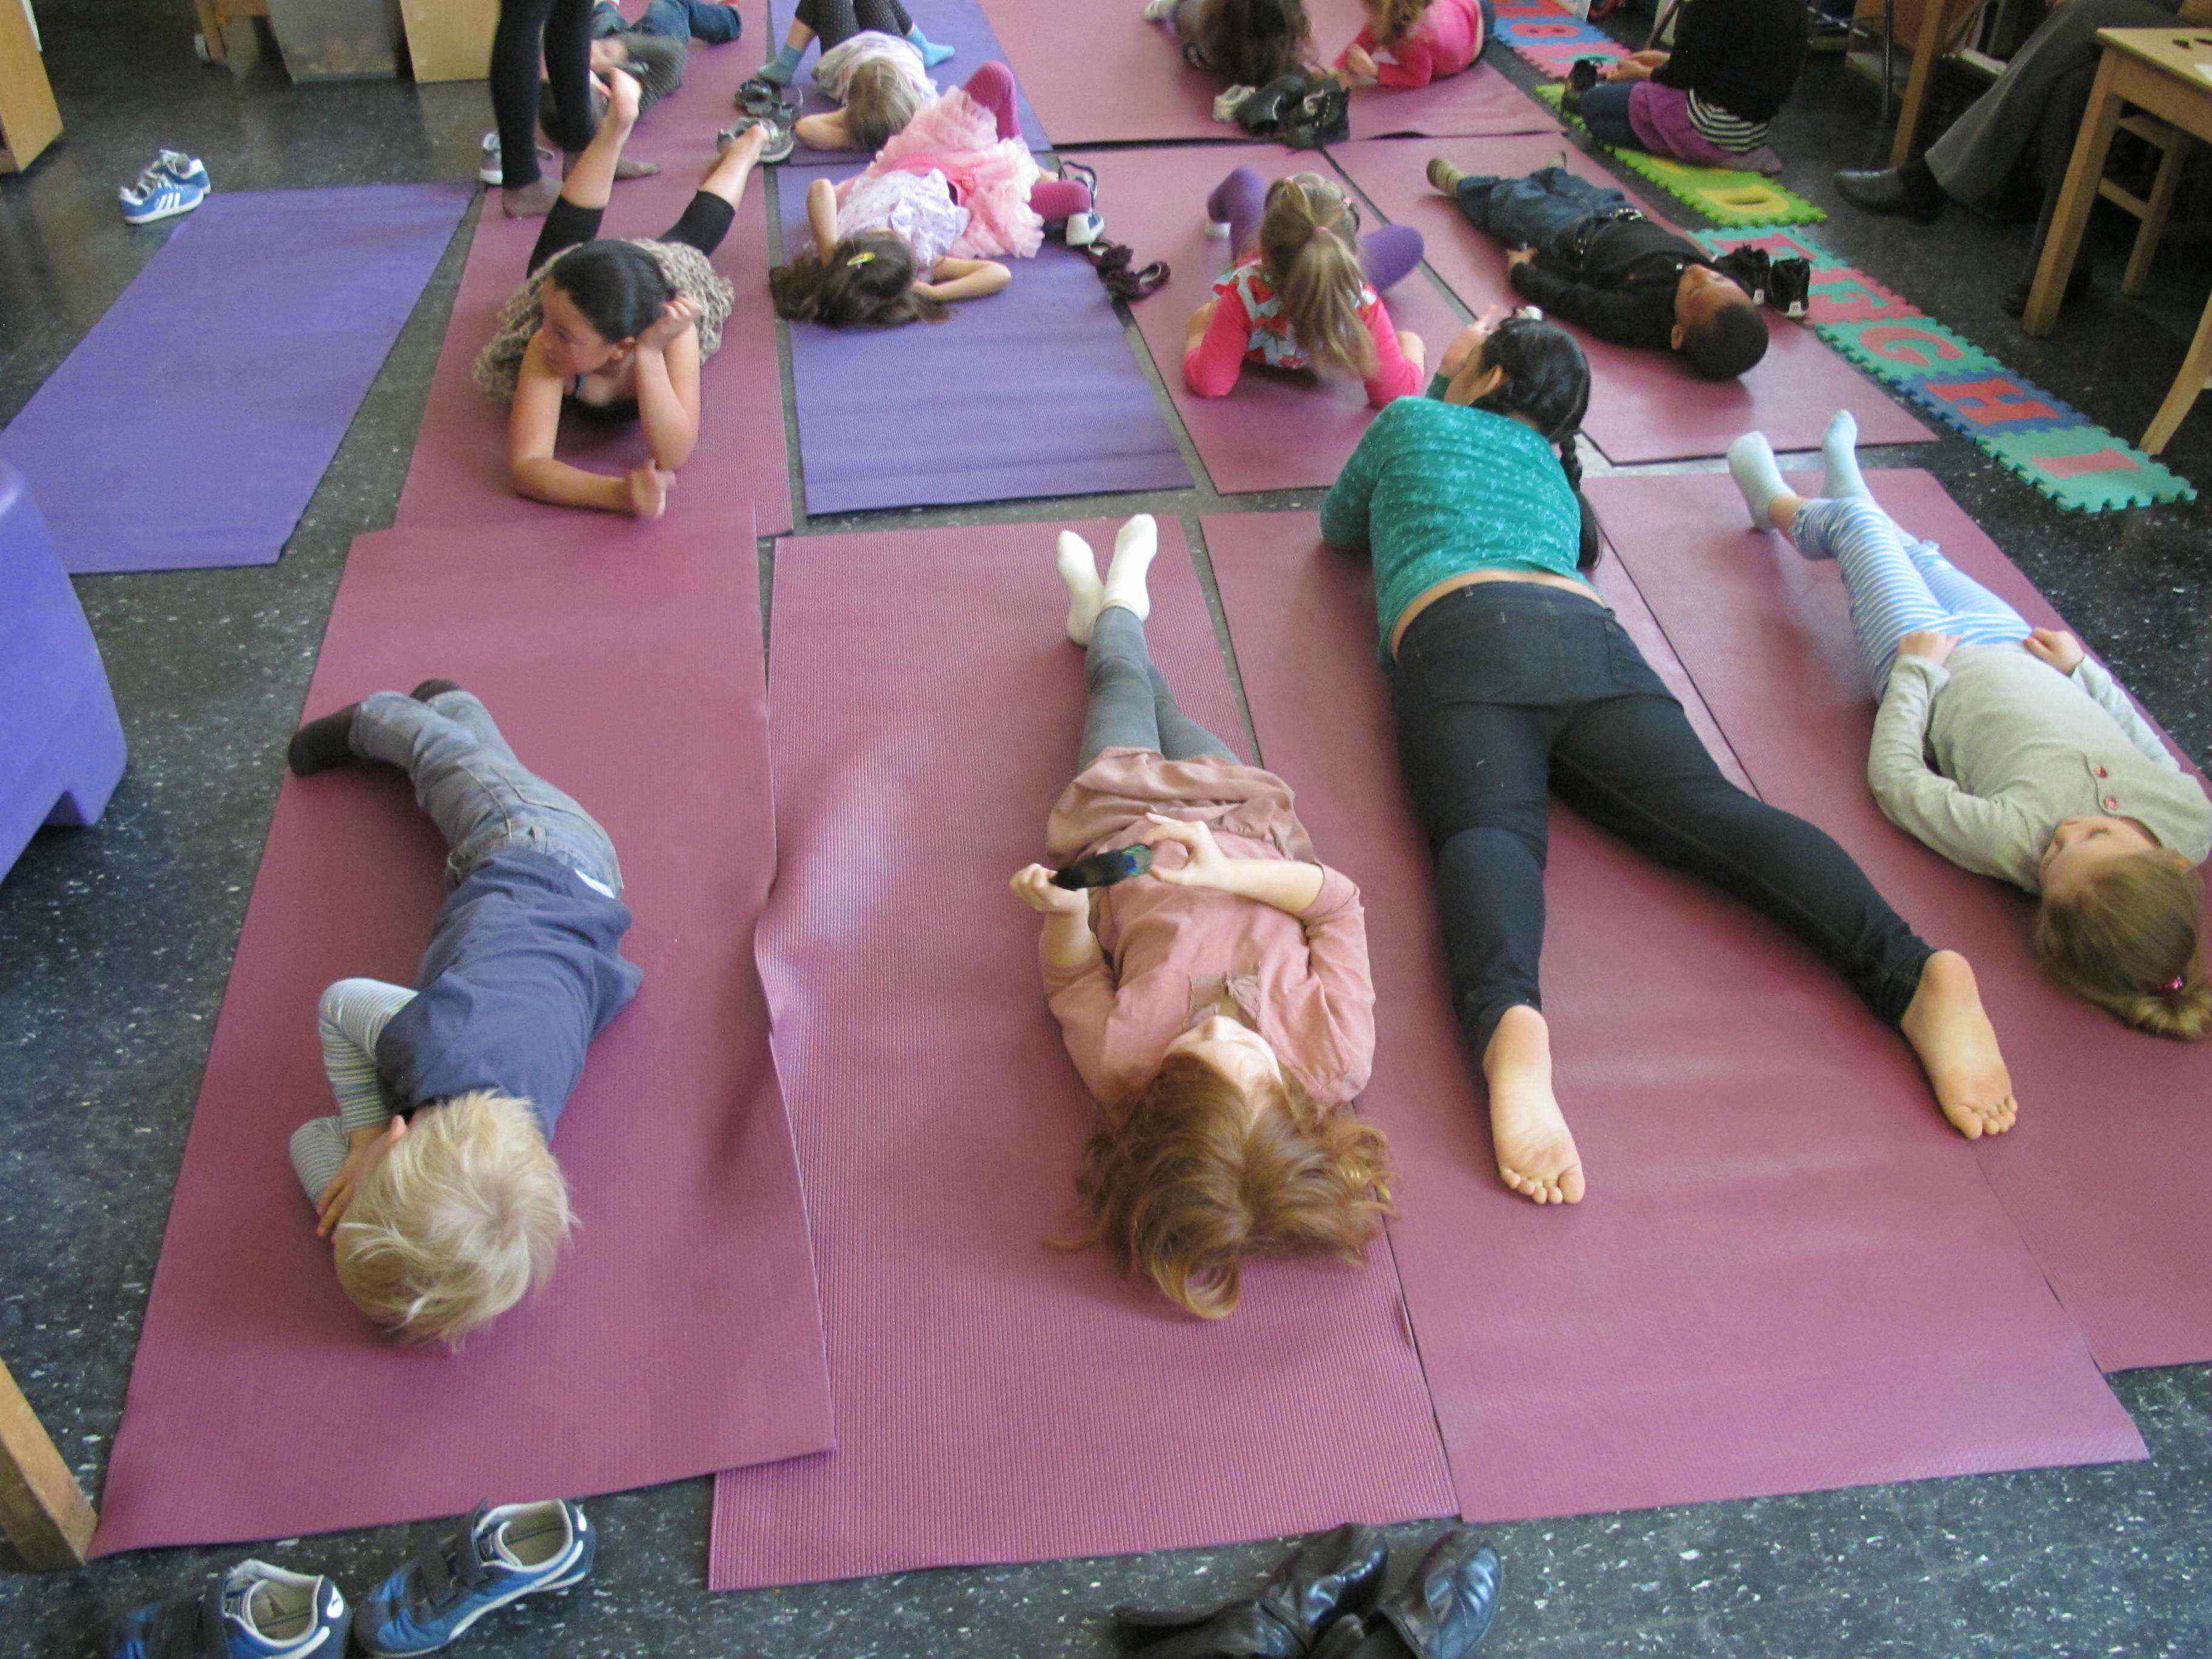 Corpse pose seems to be the most difficult for the 4 and 5-year-olds, who have trouble being still. (Photo / Rebecca Moss)